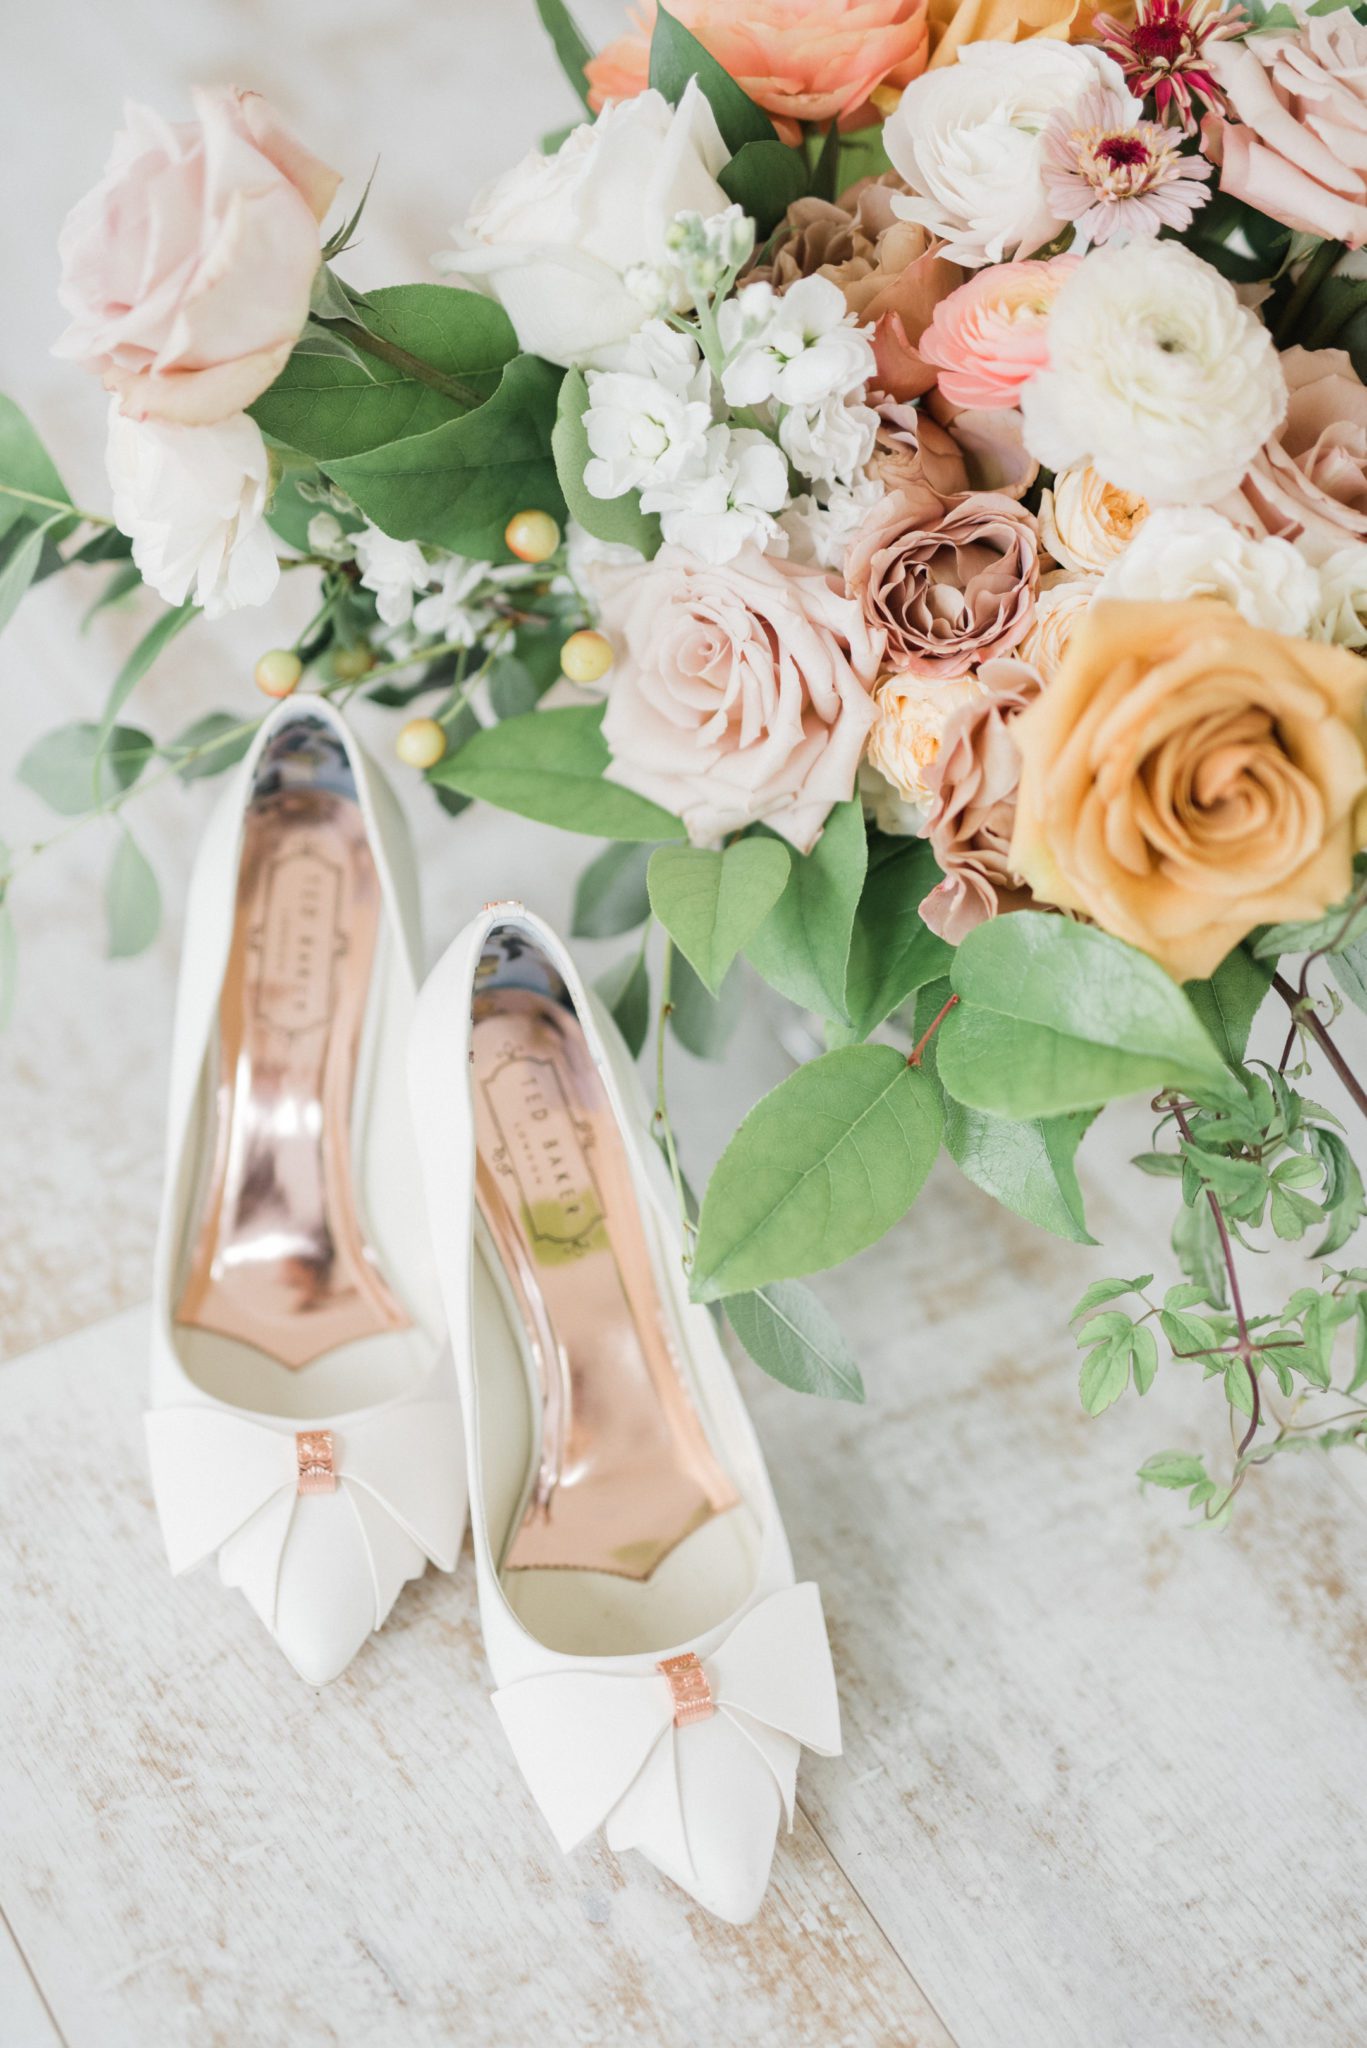 White bridal high heels with rose gold accents and bridal bouquet